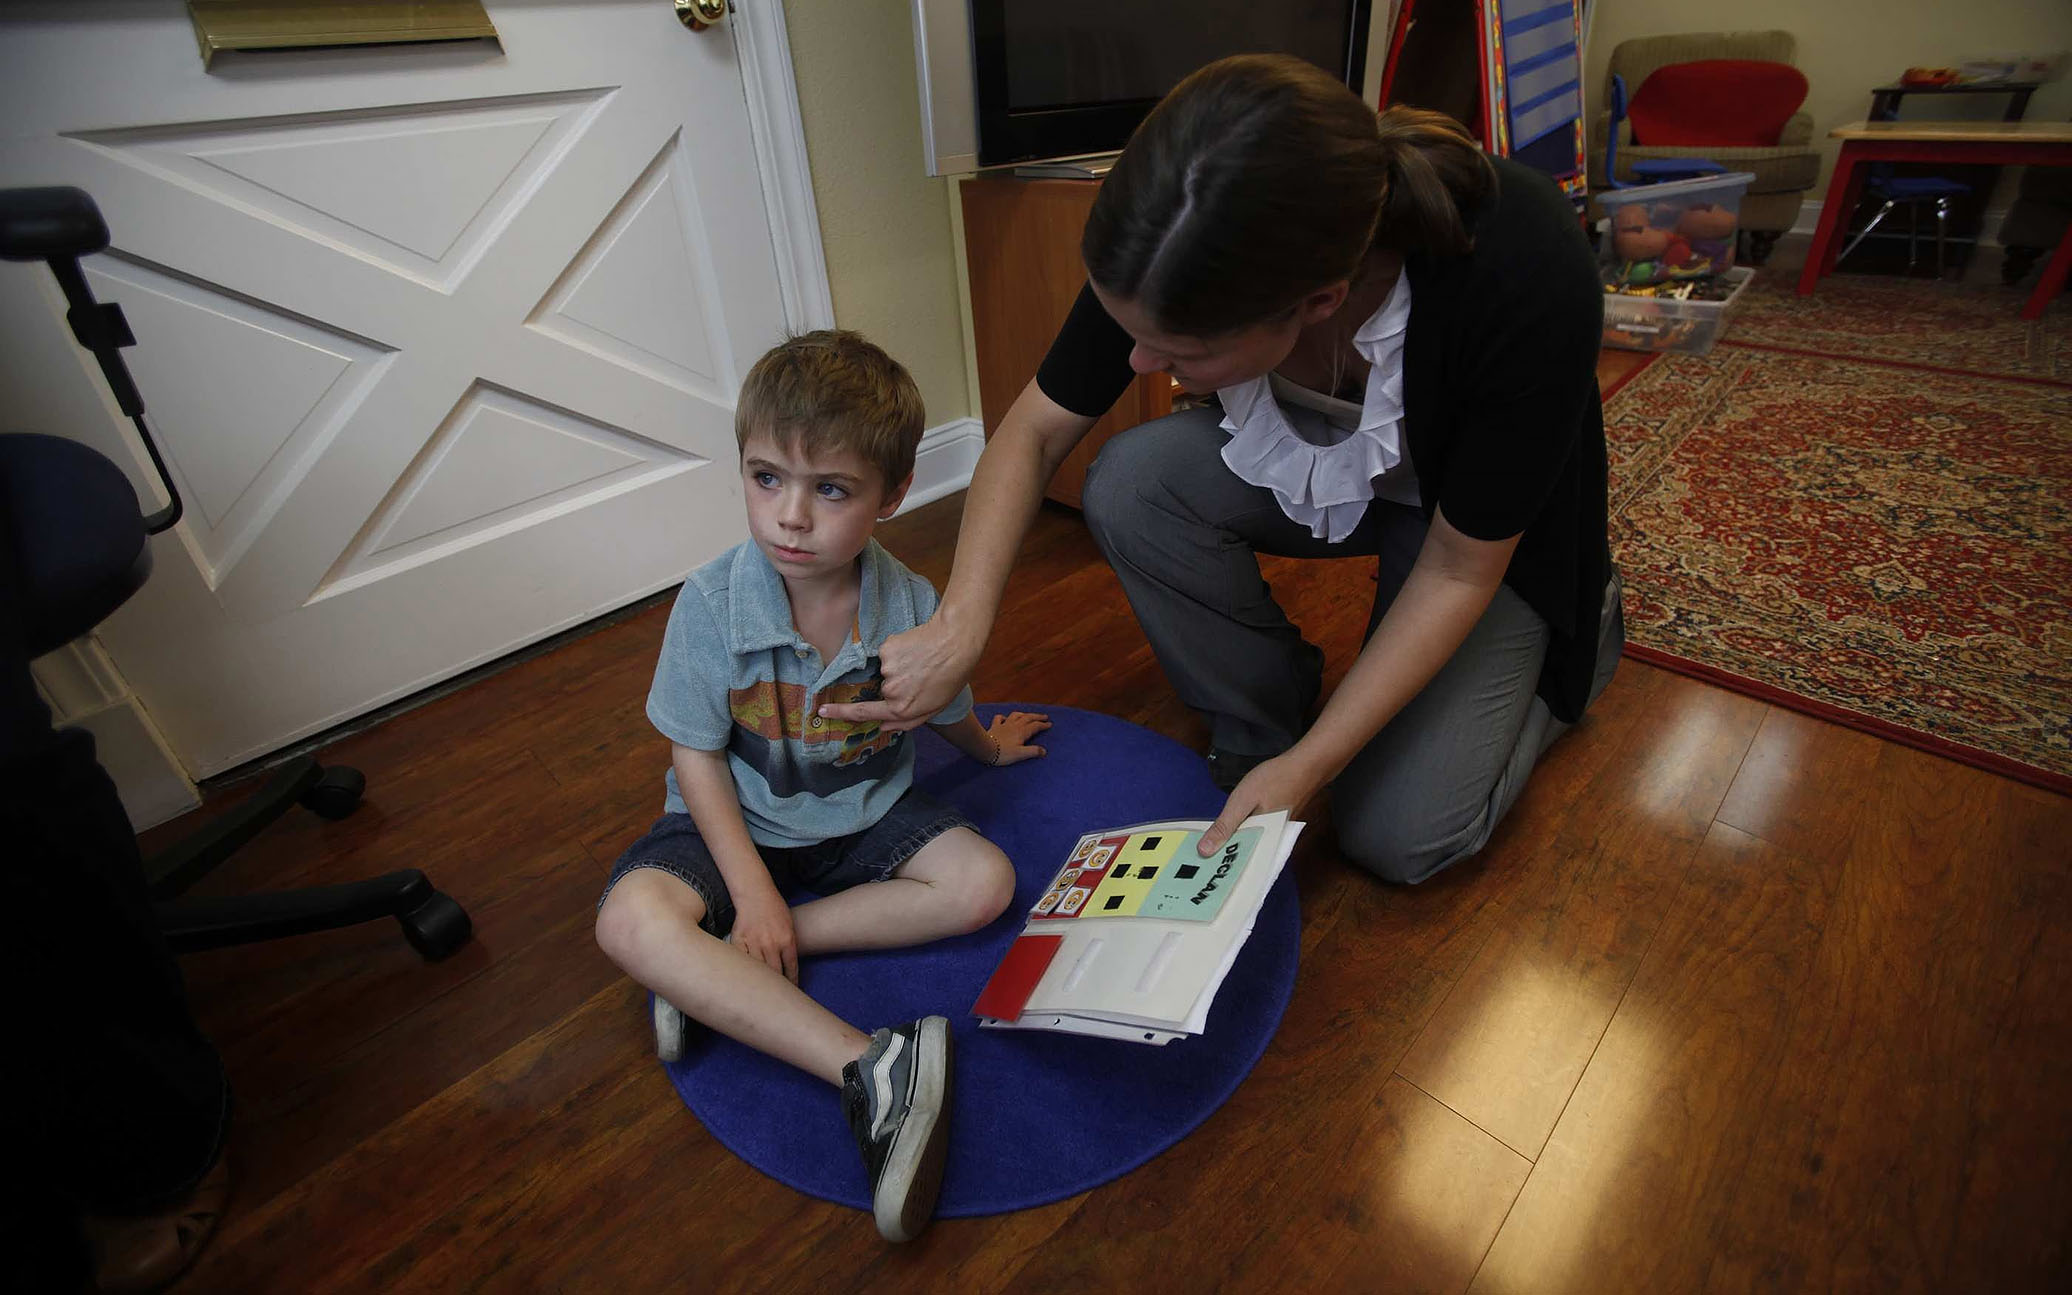 State and federal laws expand health insurance coverage for autism